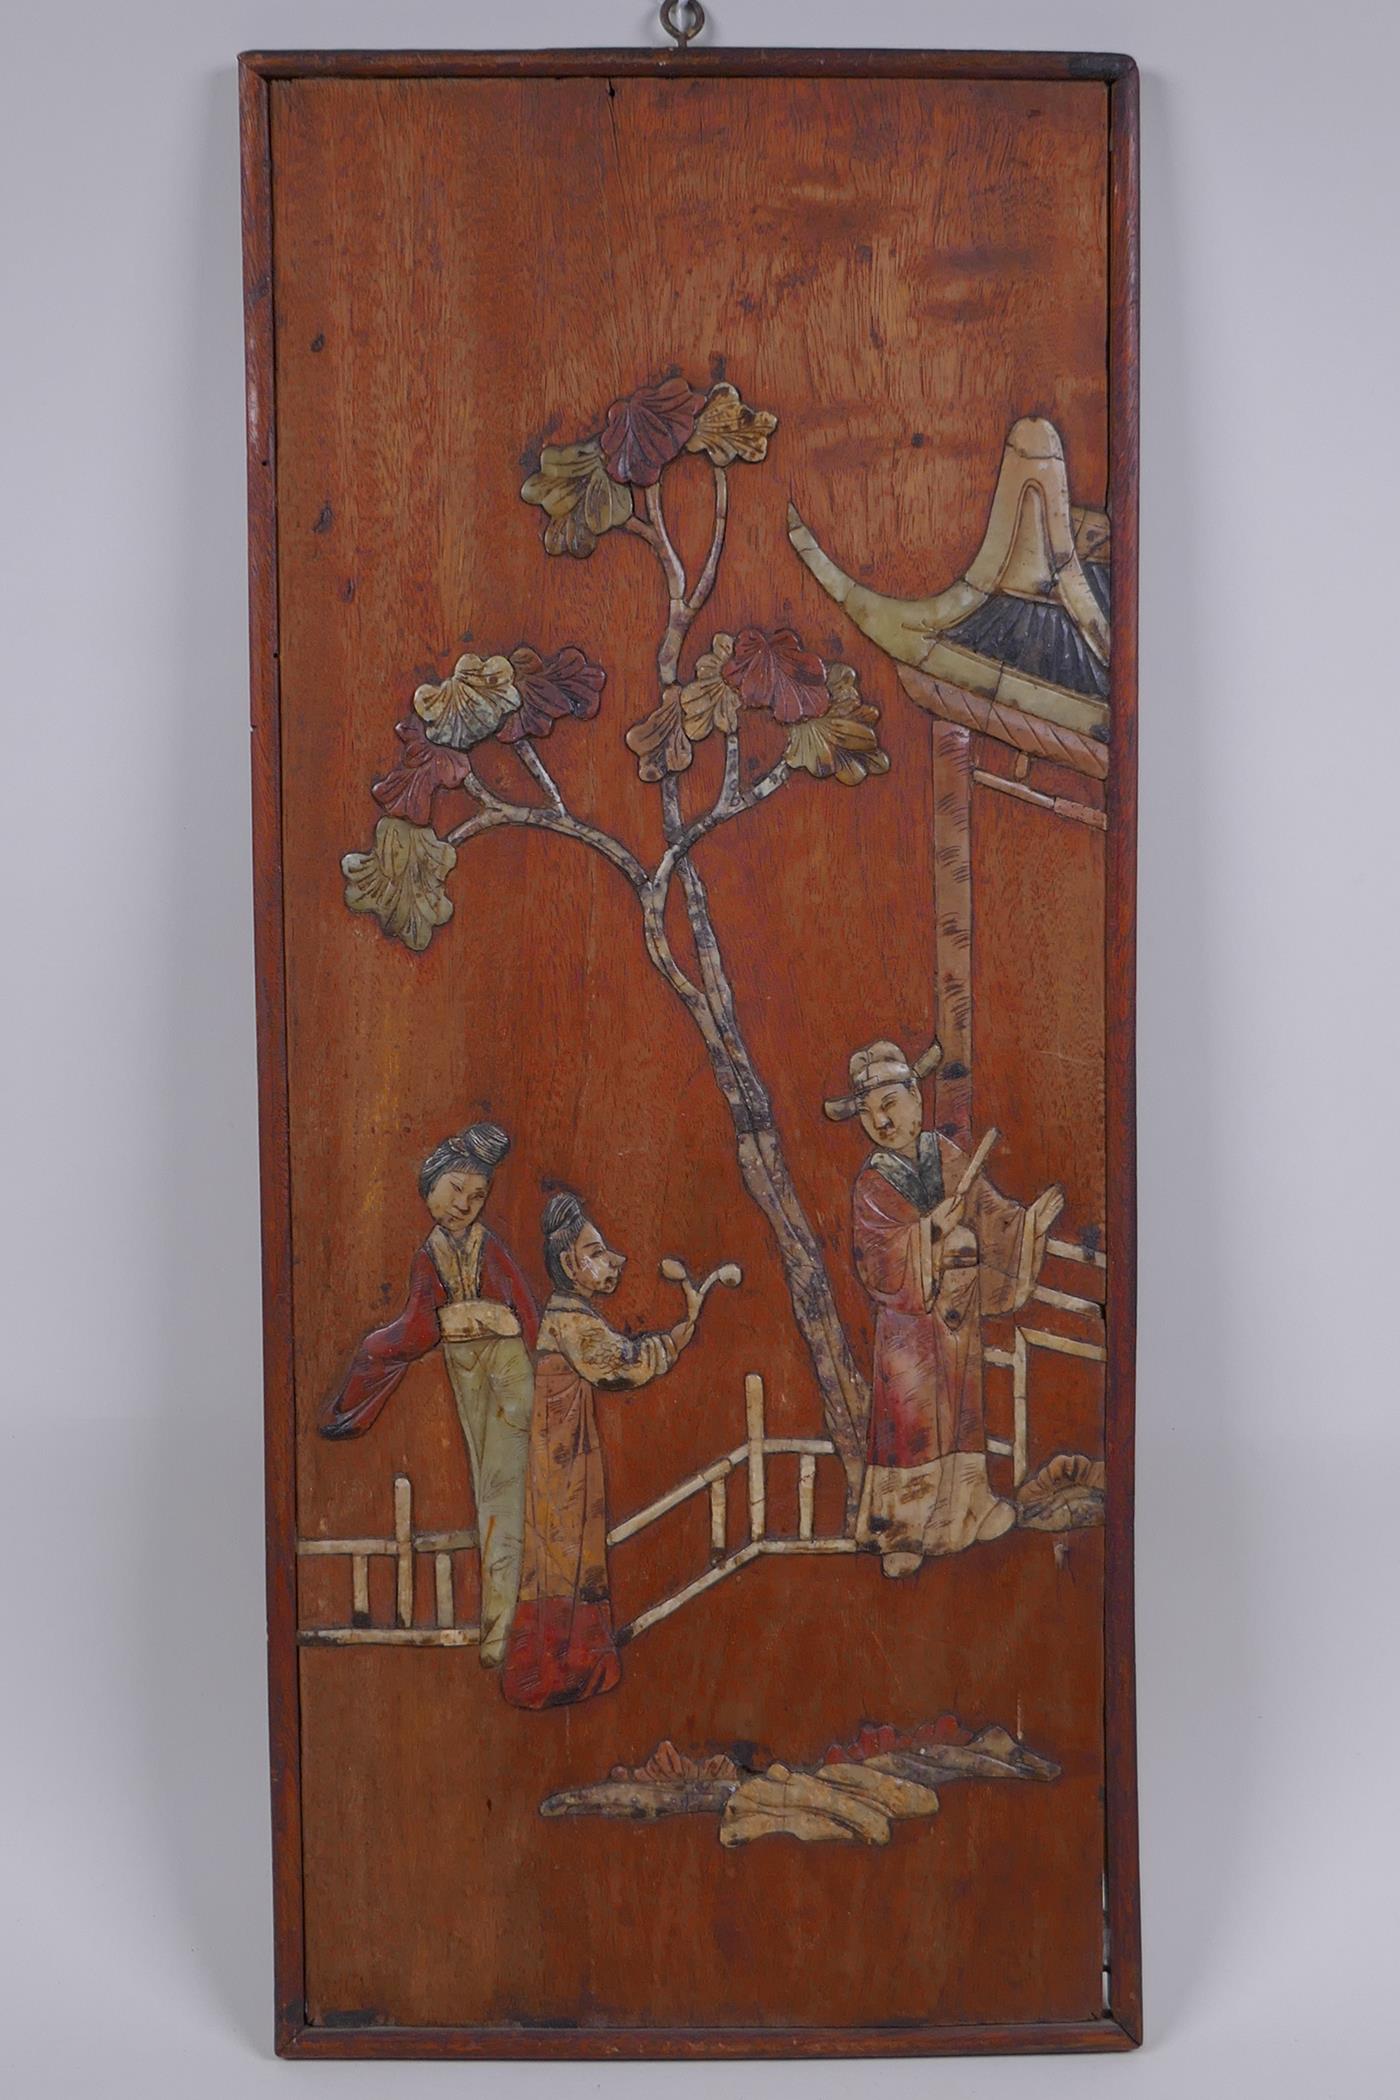 An antique Chinese hardwood panel with inlaid hardstone figural decoration, 20 x 46cm